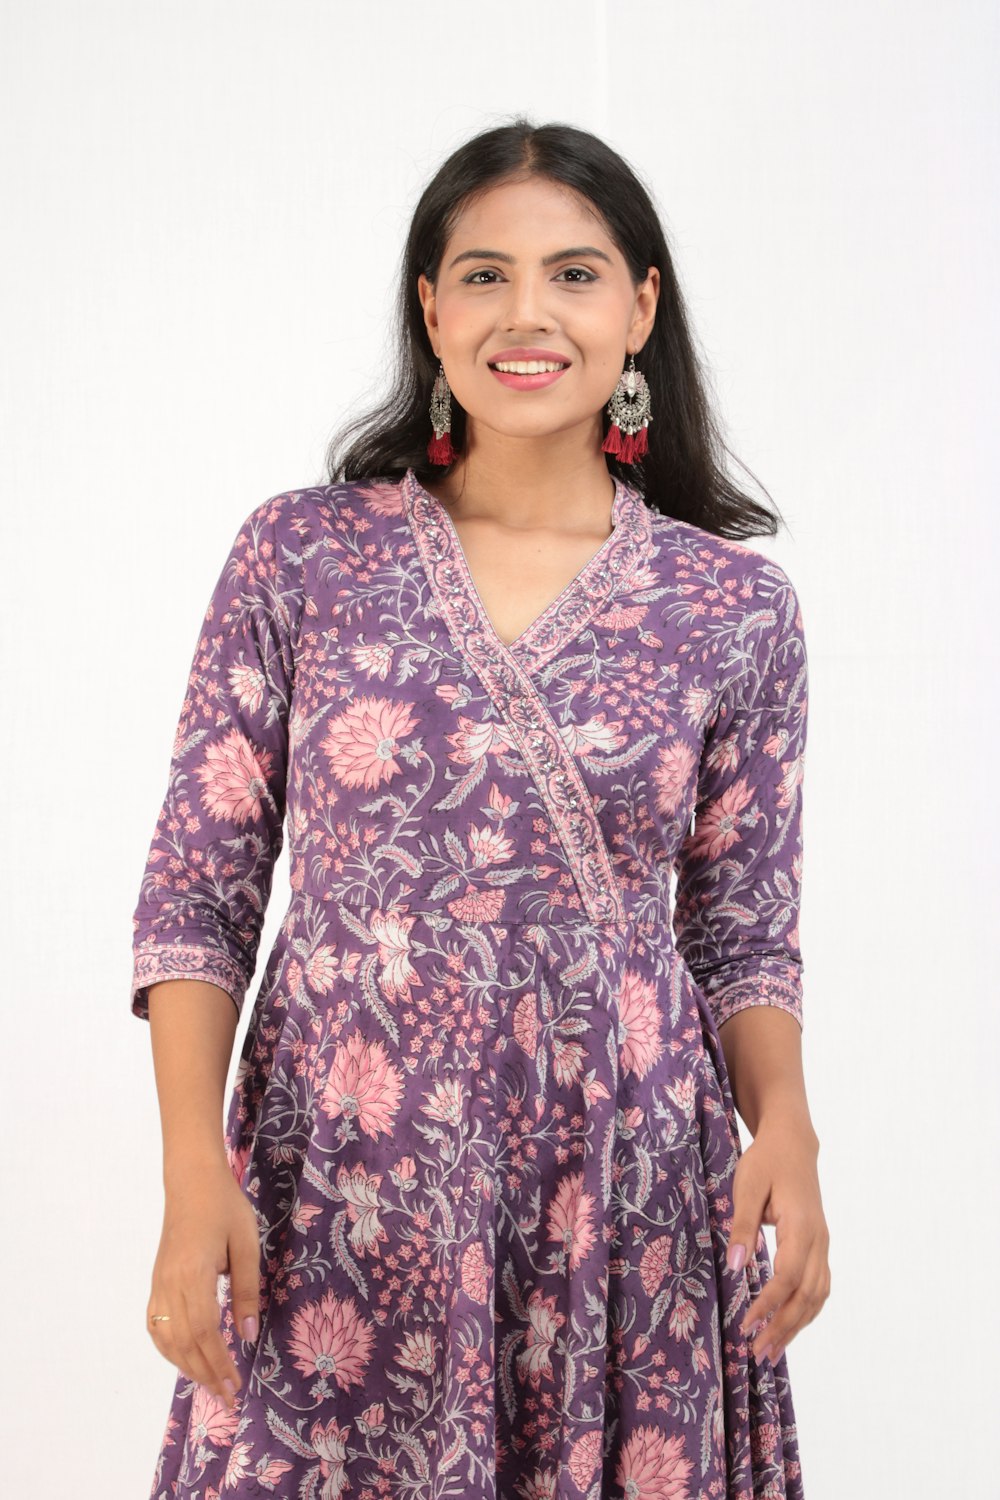 woman in purple and white floral long sleeve shirt